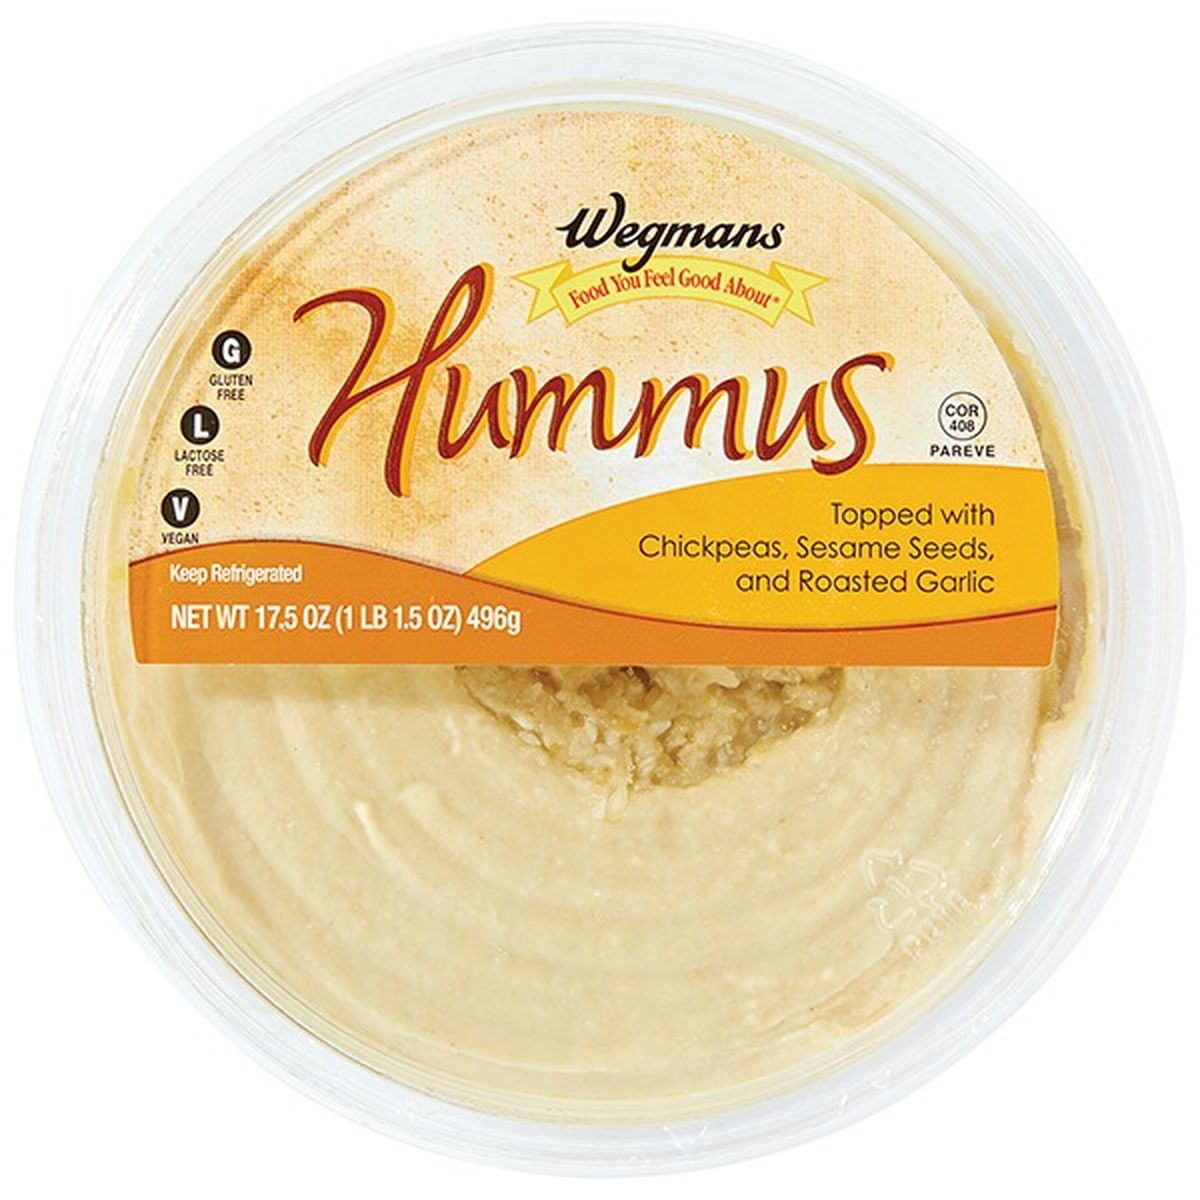 Calories in Wegmans Original Hummus Topped with Chickpeas, Sesame Seeds and Roasted Garlic, FAMILY PACK